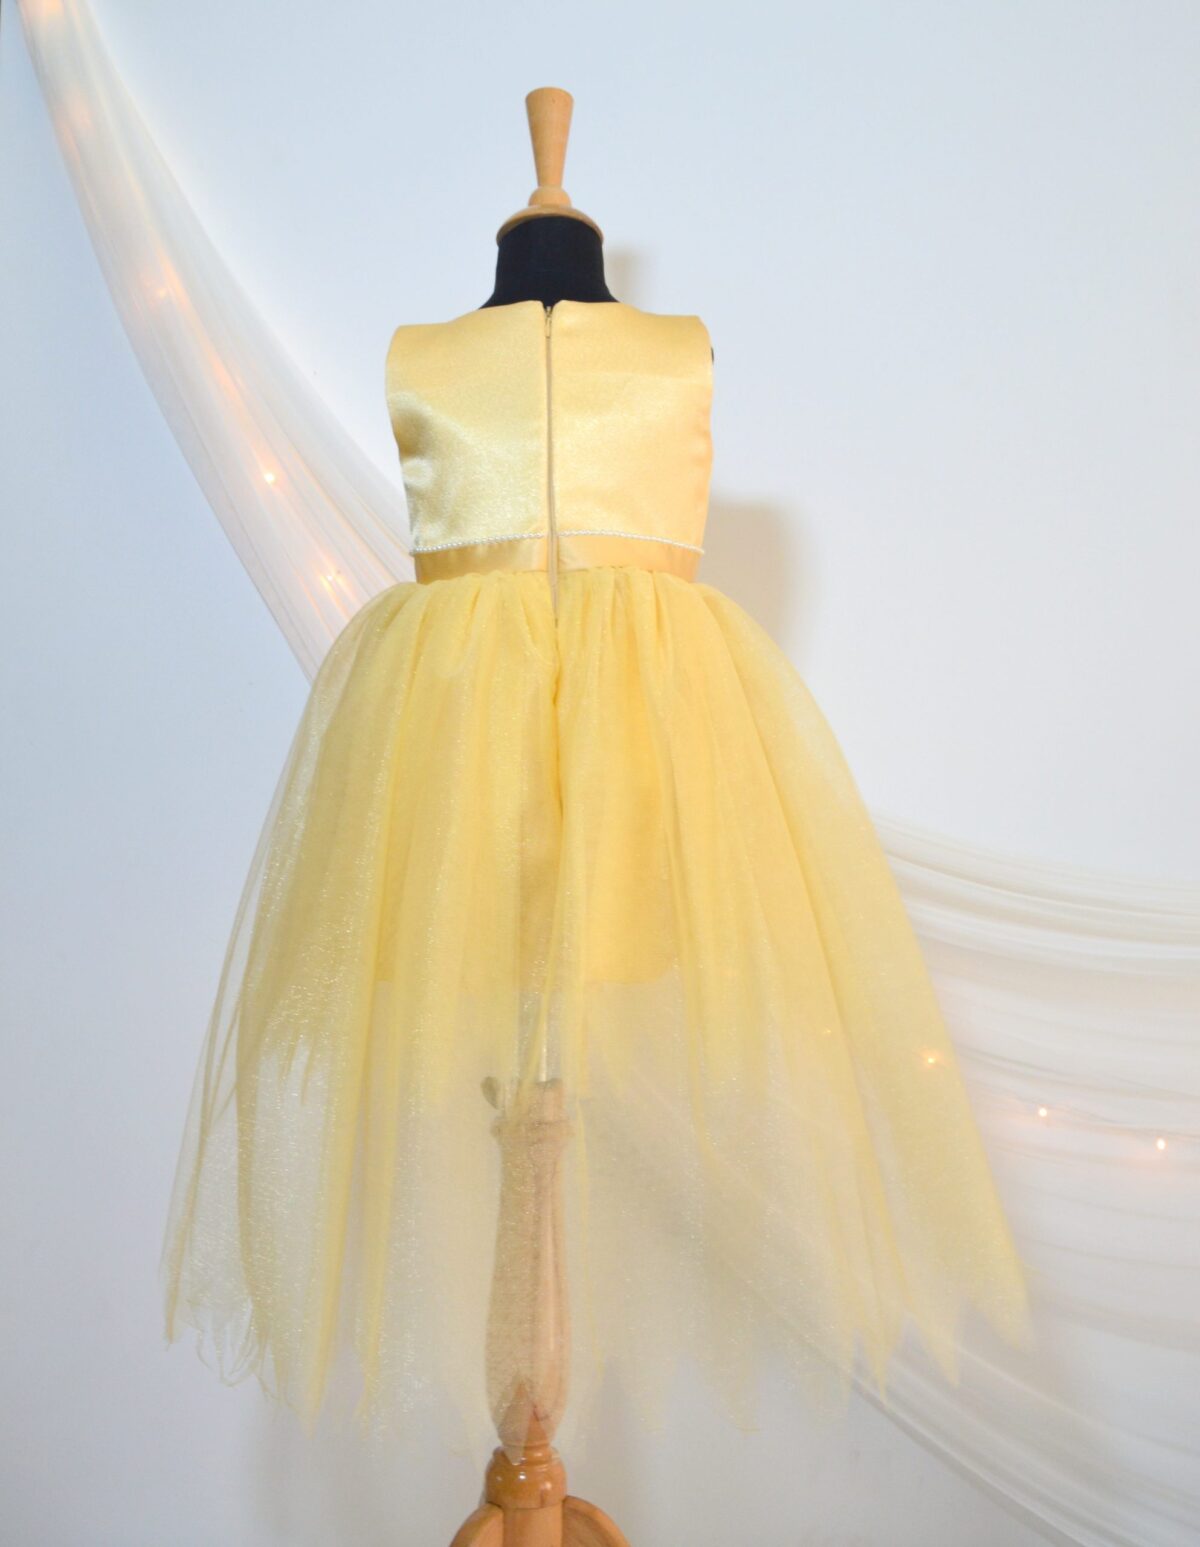 DSC 0039 scaled High-Low Bow Dress- Golden Yellow